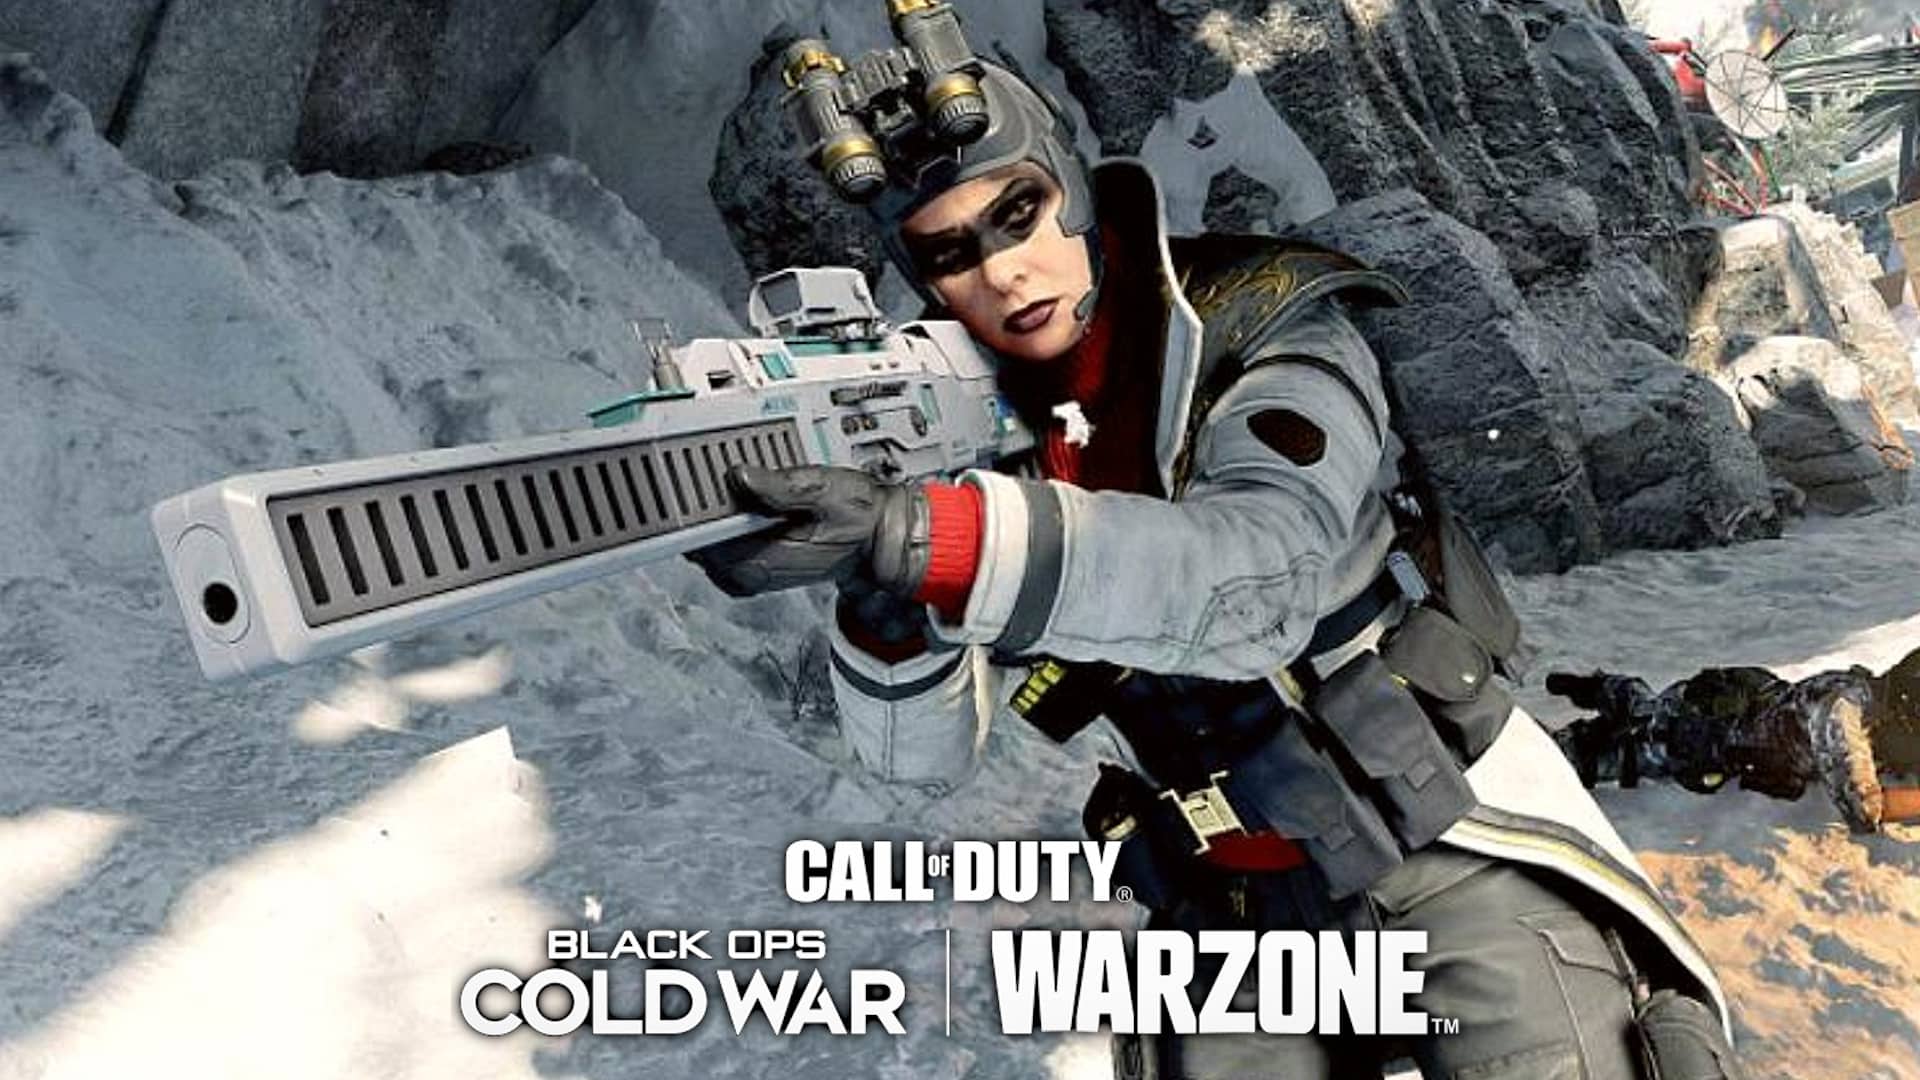 Forget Valorant and Call of Duty: Warzone - Godfather of Tactical